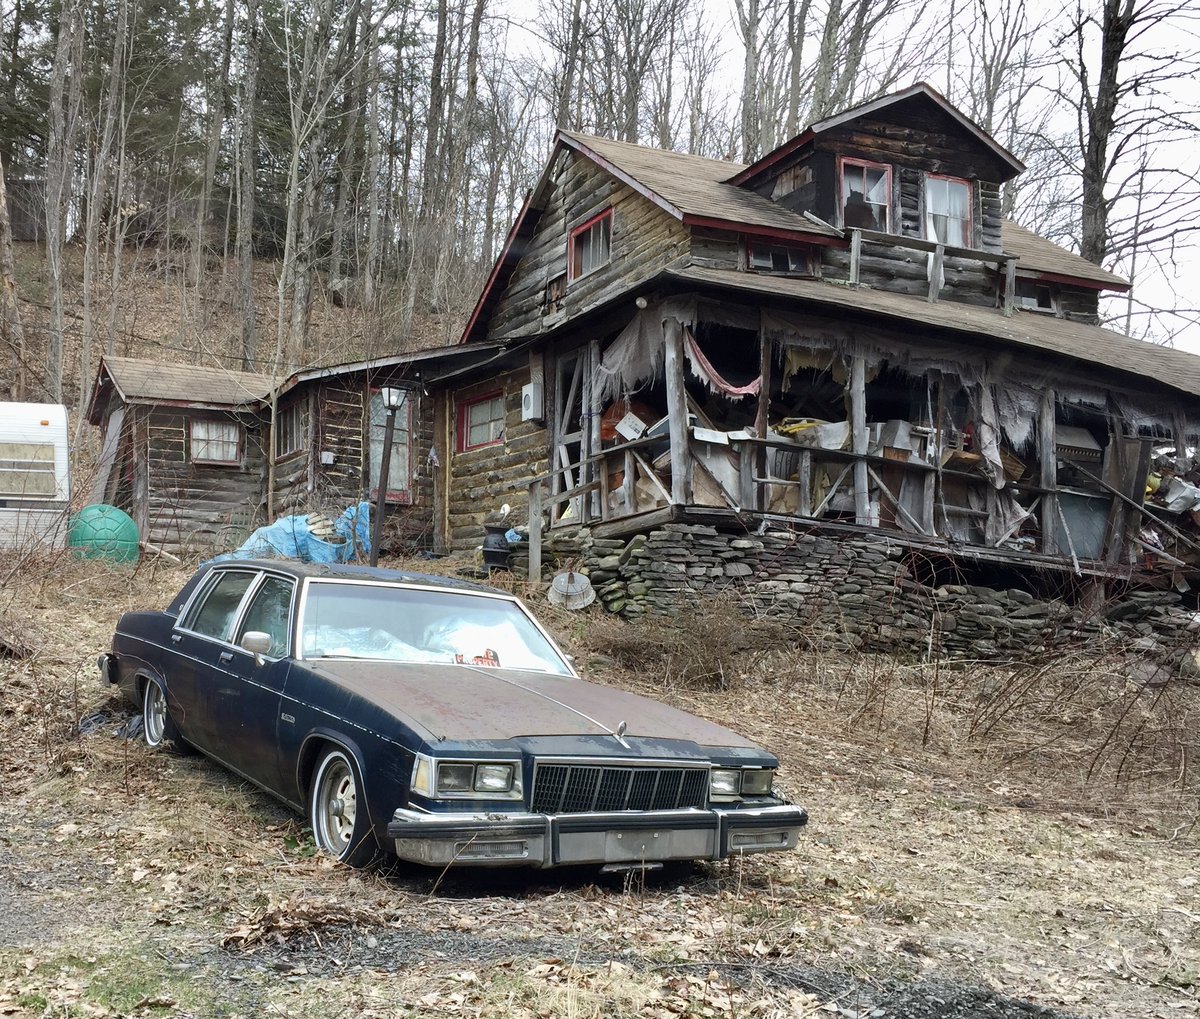 Lots of swanky homes in the Catskills, but plenty of derelict/abandoned properties too. This one caught my eye while researching Birdeye @saltpublishing